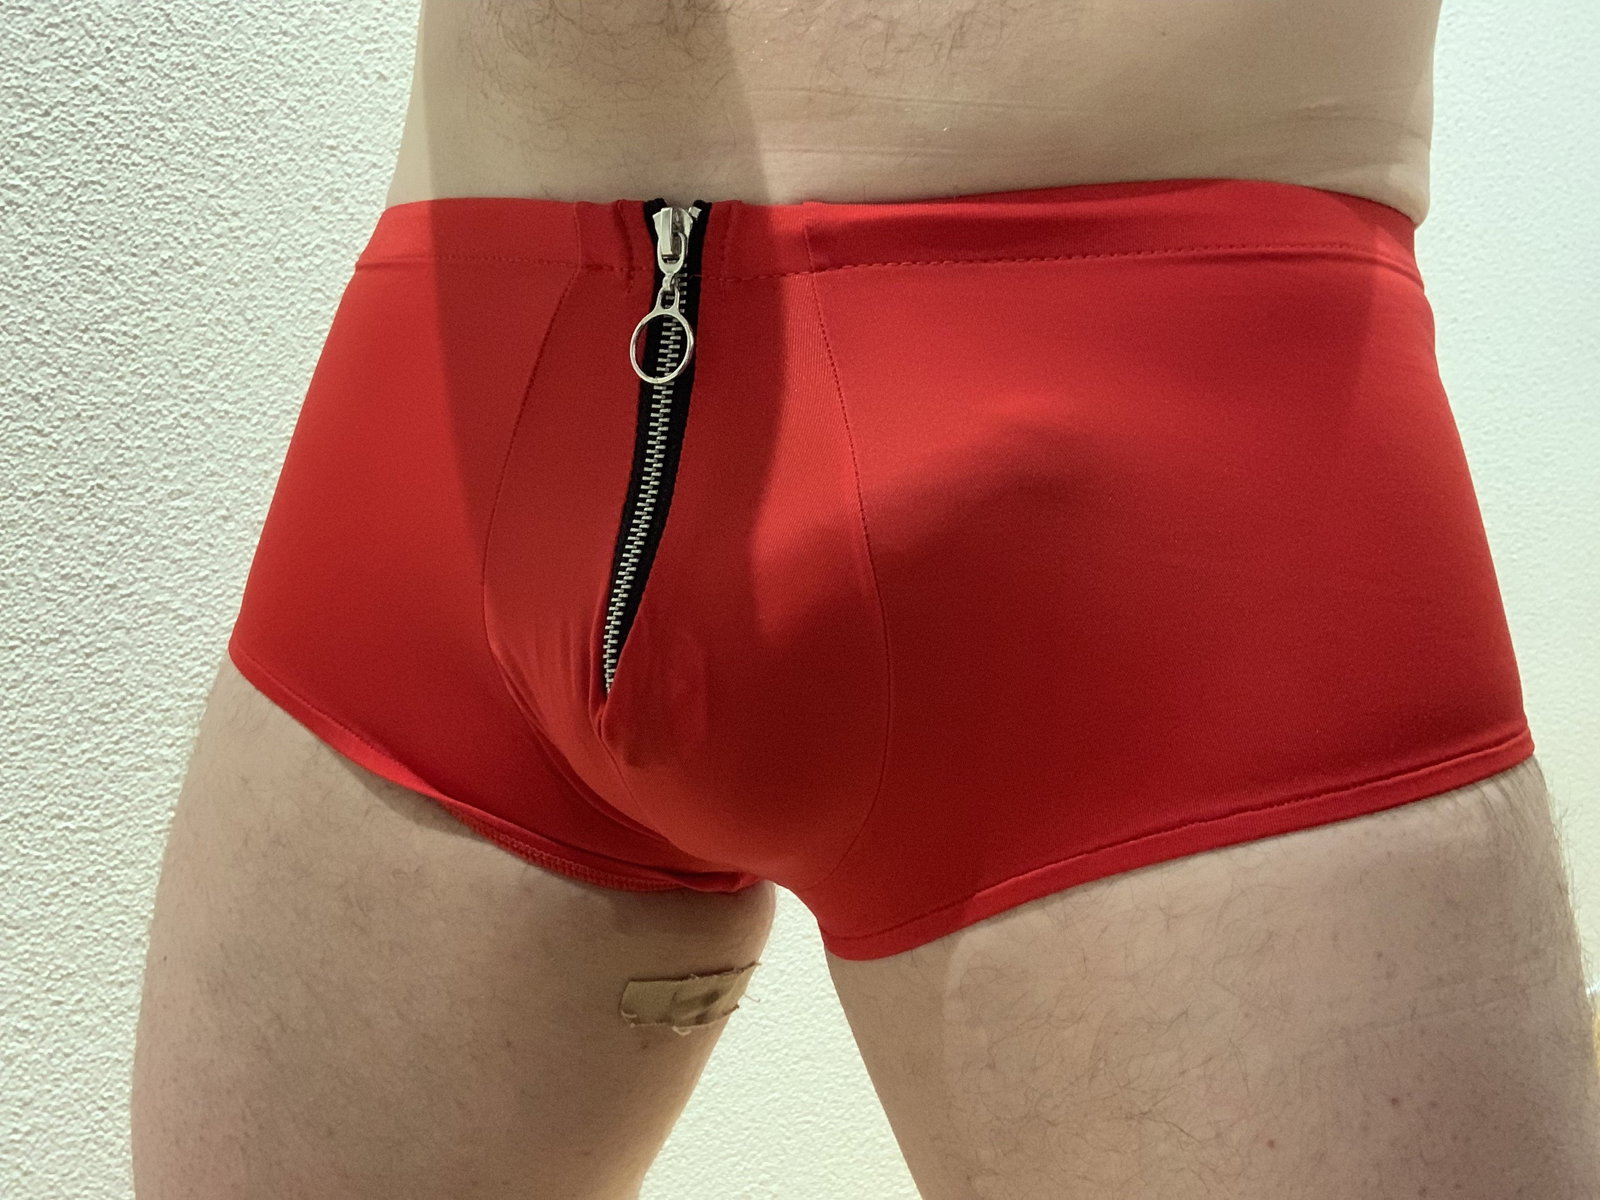 Watch the Photo by thoughtfulenjoyment with the username @thoughtfulenjoyment, who is a verified user, posted on February 3, 2022. The post is about the topic Anonymous Amateurs. and the text says 'the very hot 🔥 @SexyMissG - check her page - said she wanted me to see in these red #malepower briefs with zipper. Of course you sexy. @CrazyLife might be inspired 🤩'